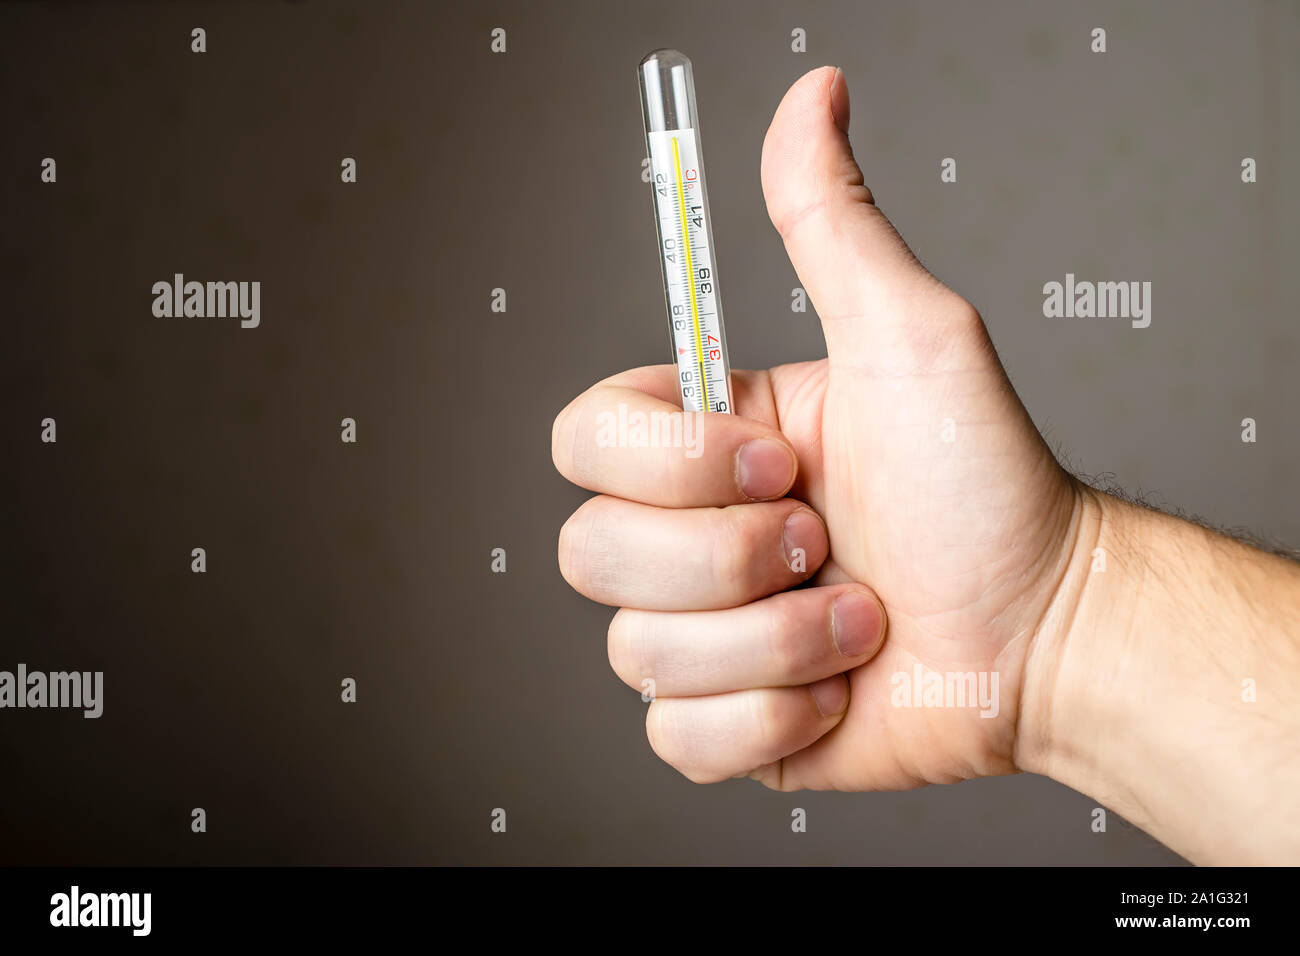 a sick man holding a medical thermometer and showing thumb indicating that he is all right Stock Photo